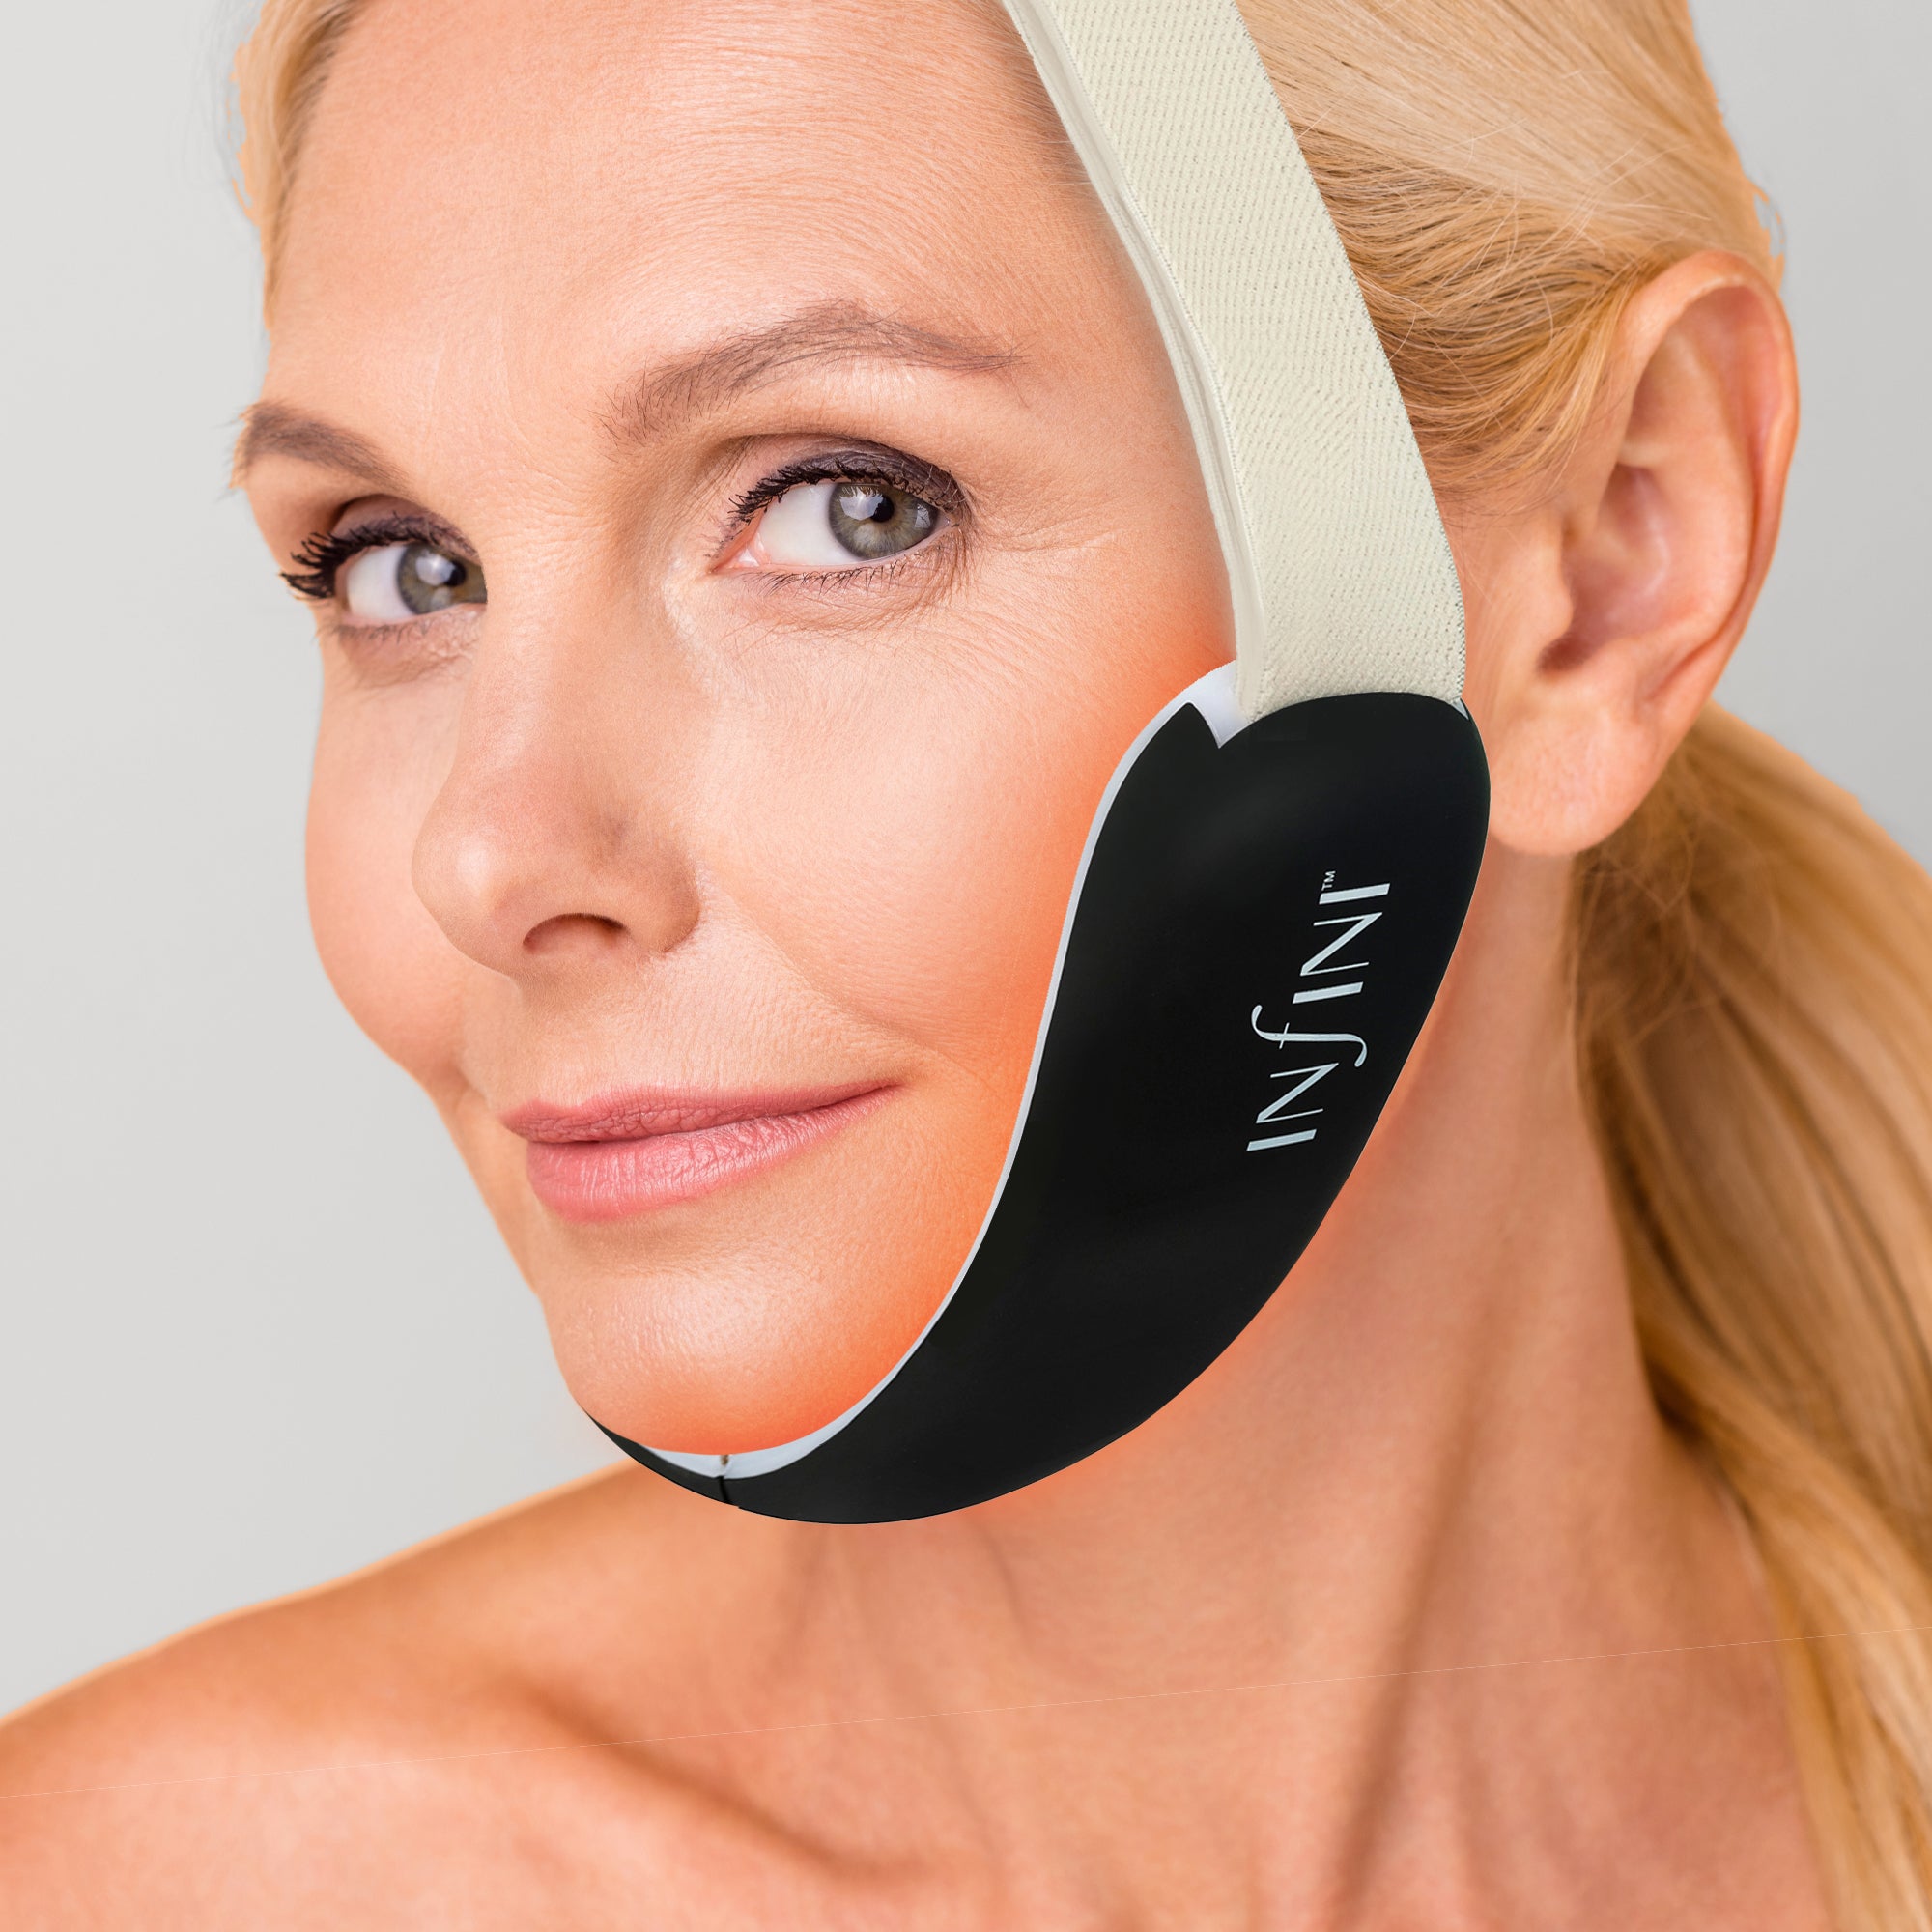 Sonic Therapy Firming Chin Device